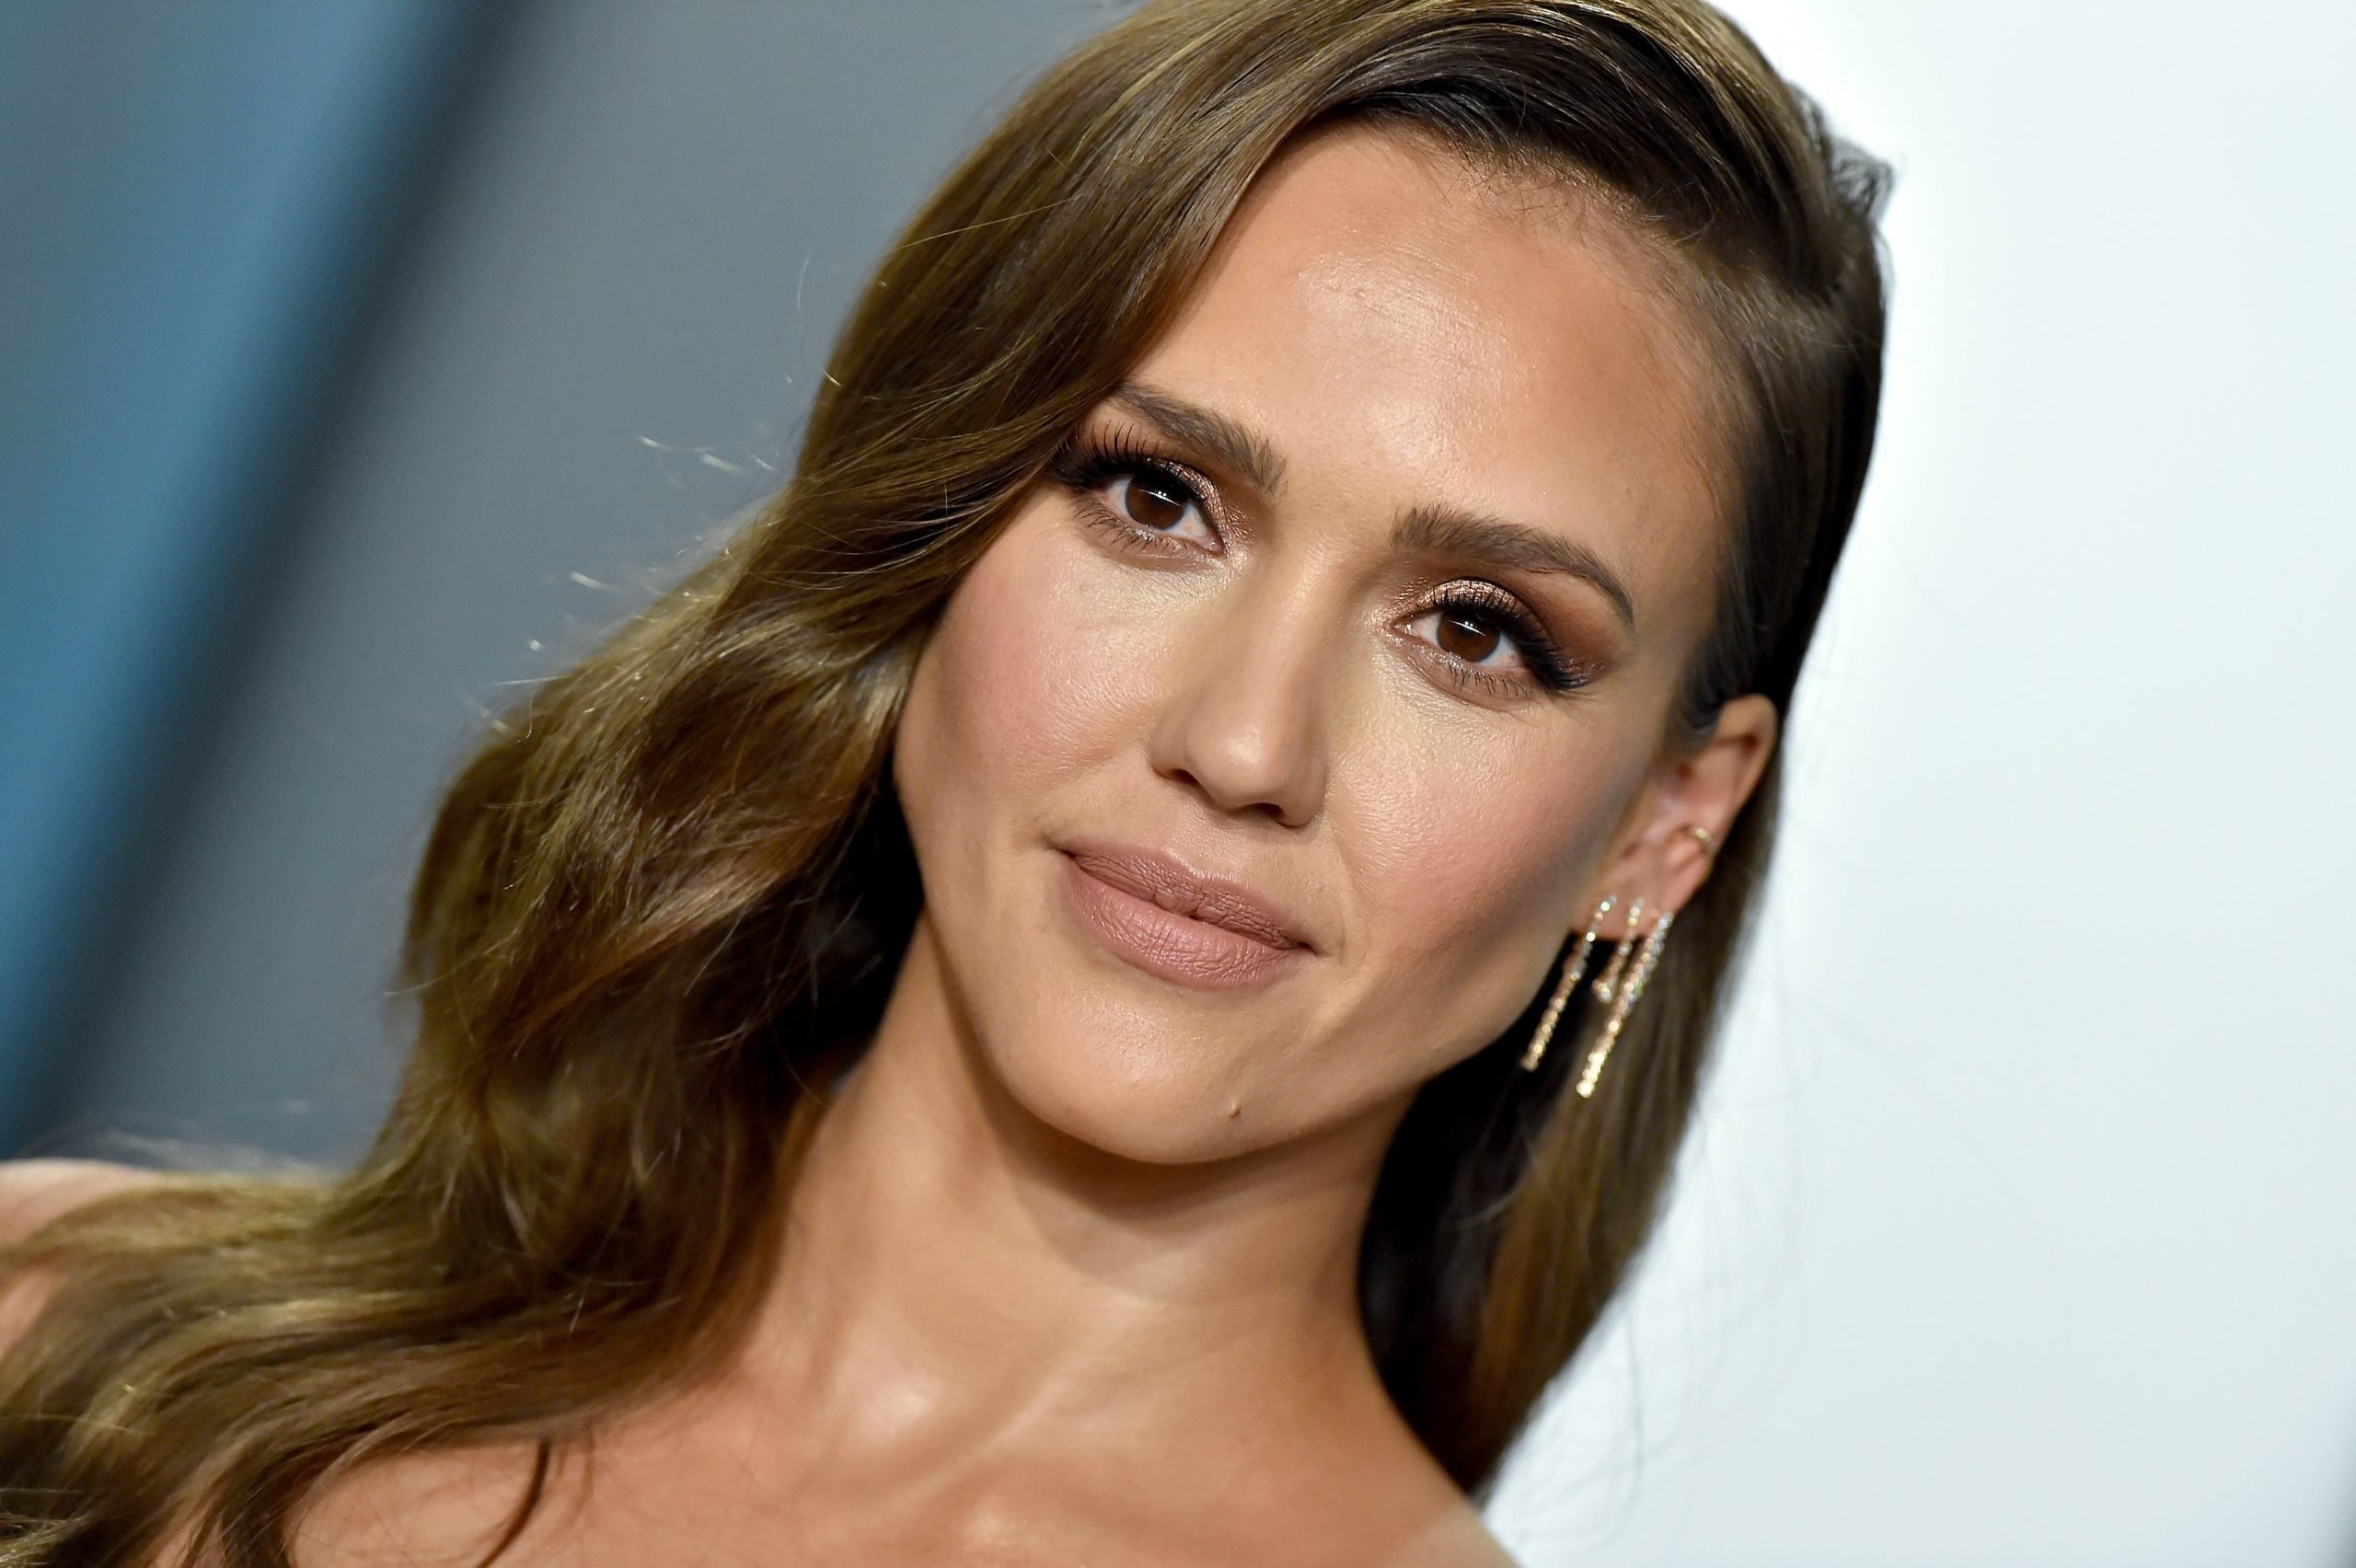 Jessica Alba Opens Up About Why She Embraces Imperfections in Life